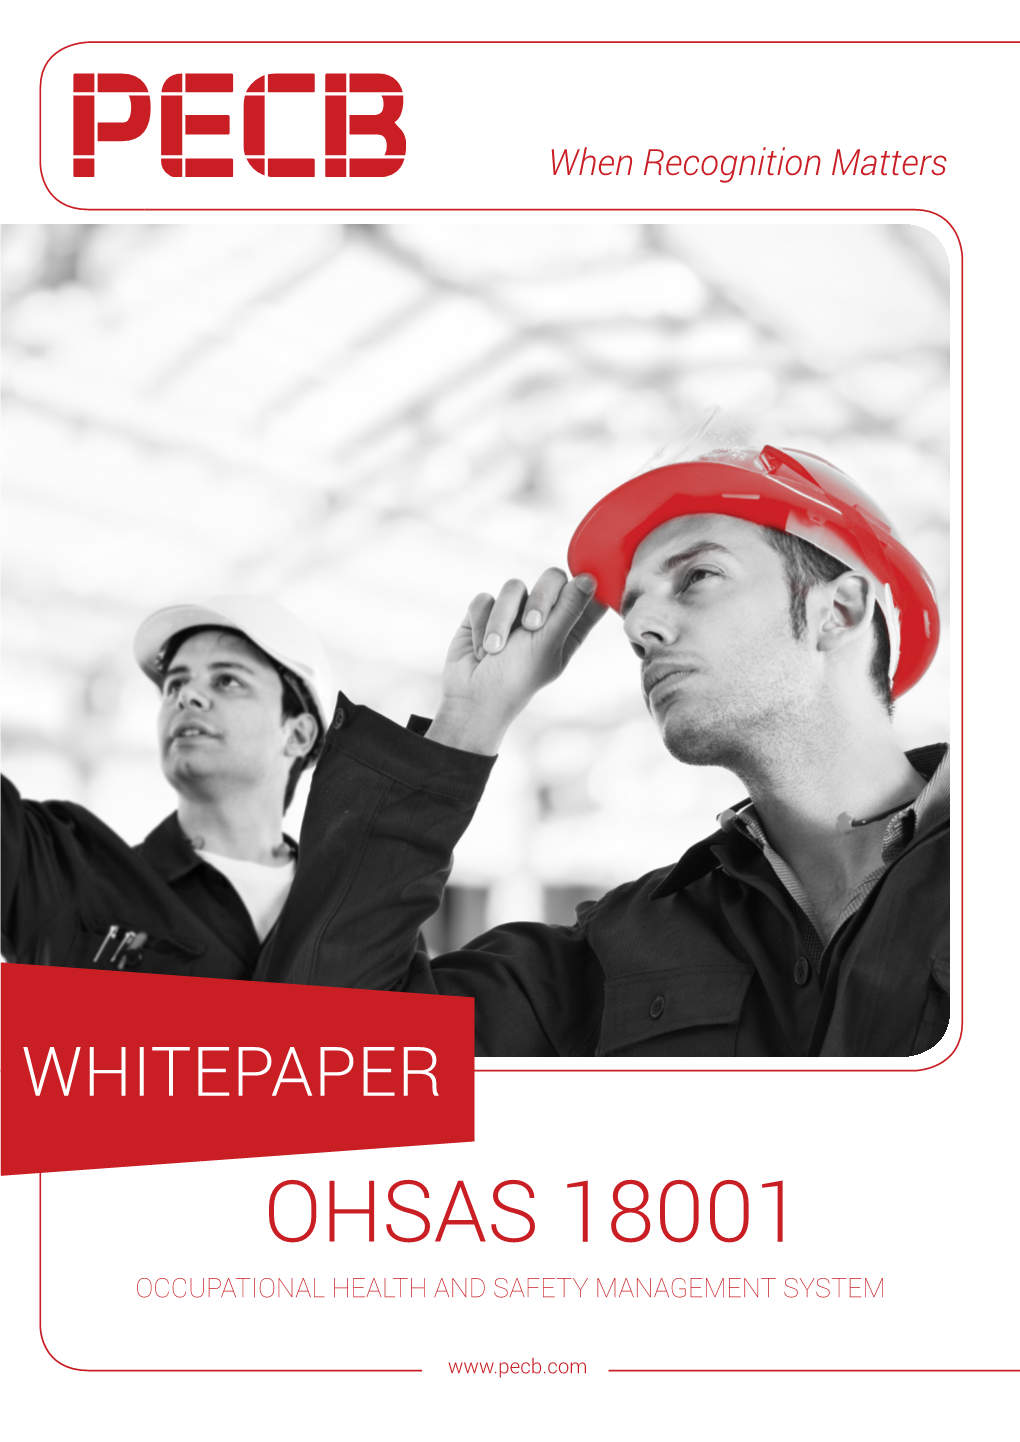 Ohsas 18001 Occupational Health and Safety Management System